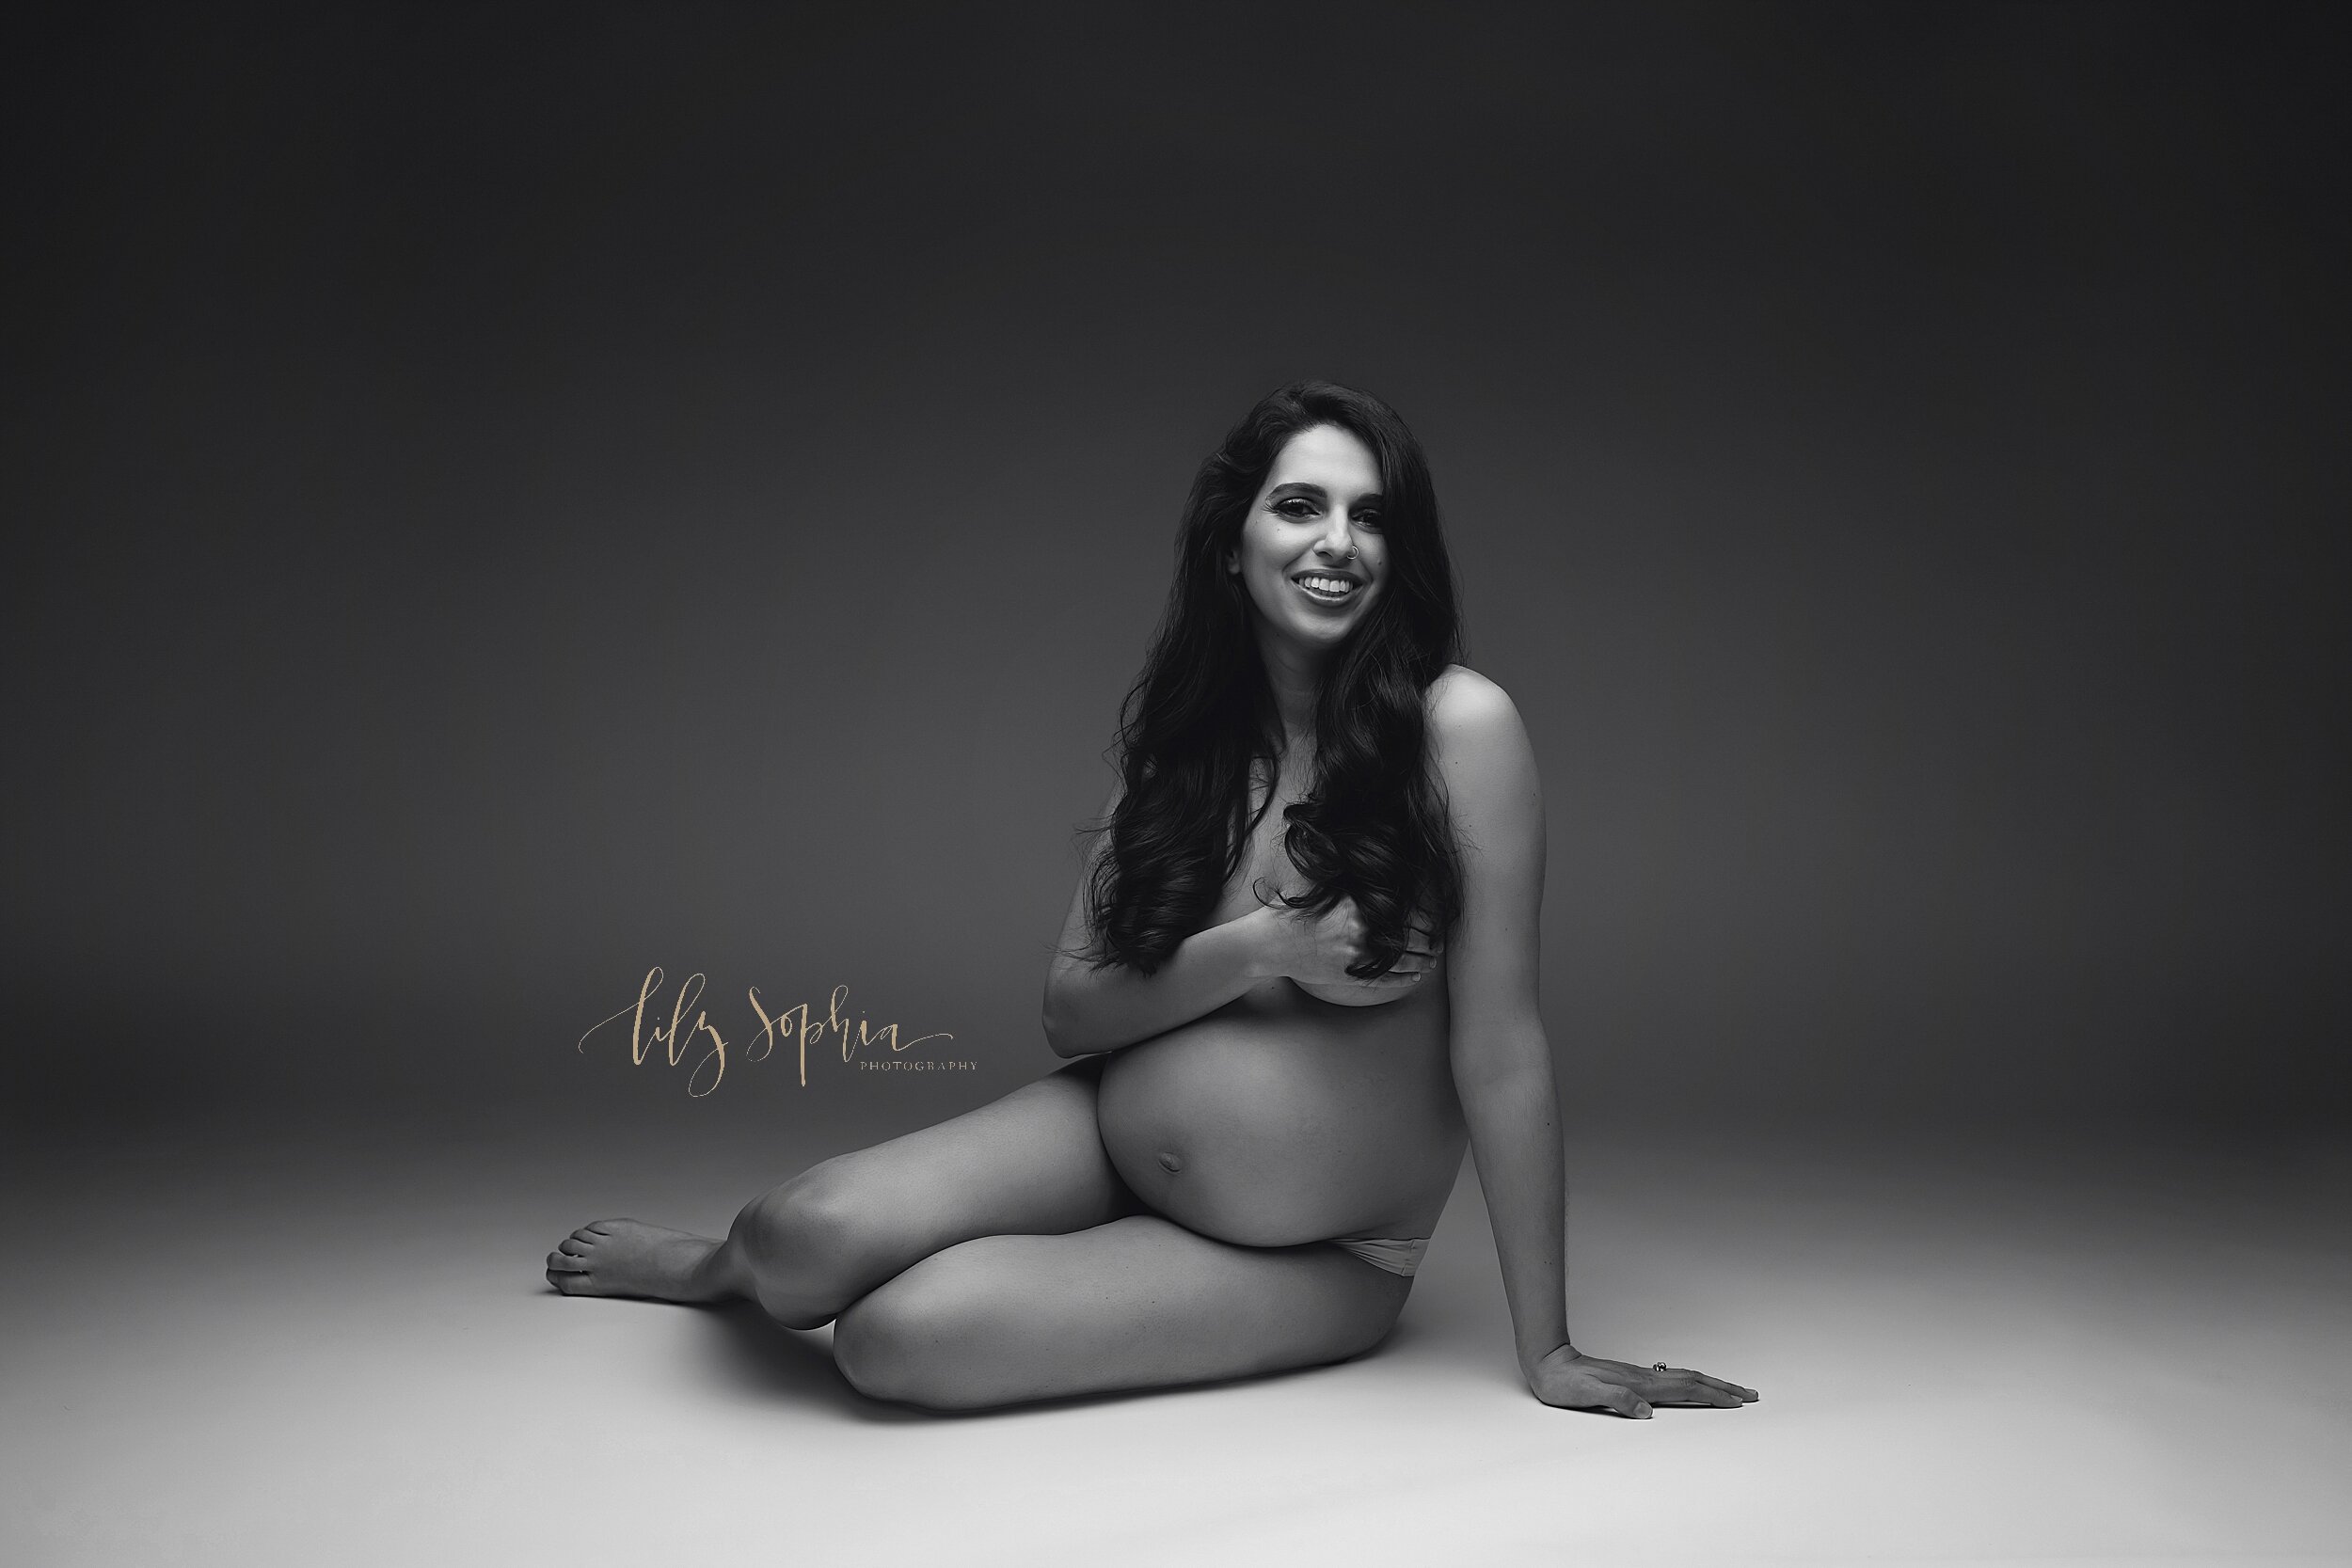  A B&amp;W fine art modern maternity studio portrait of a happy pregnant woman with long brown hair sitting like a mermaid on the floor while covering her breasts. 